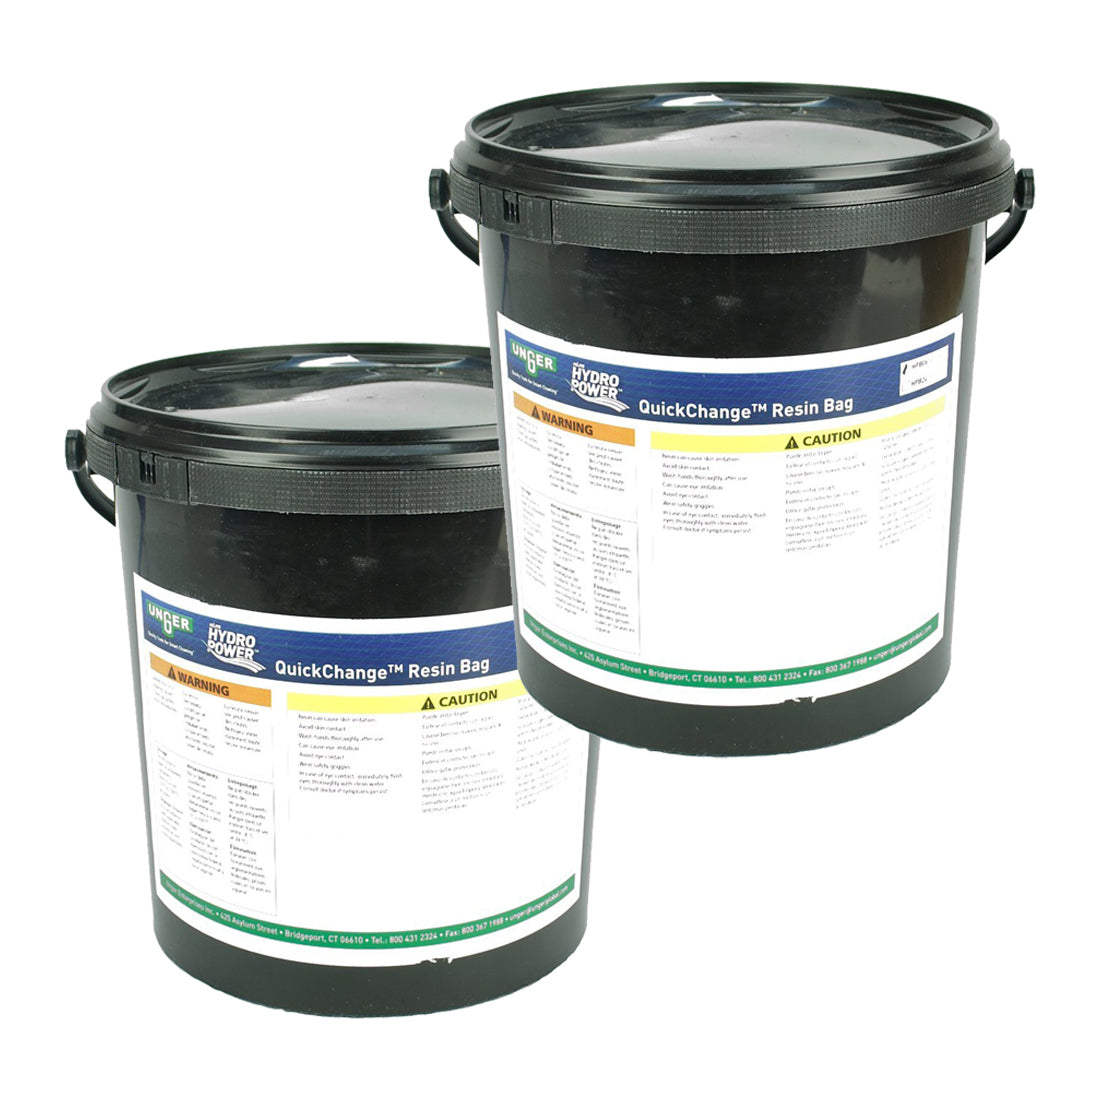 Unger HydroPower Resin Bag - Pack of Two Pail View